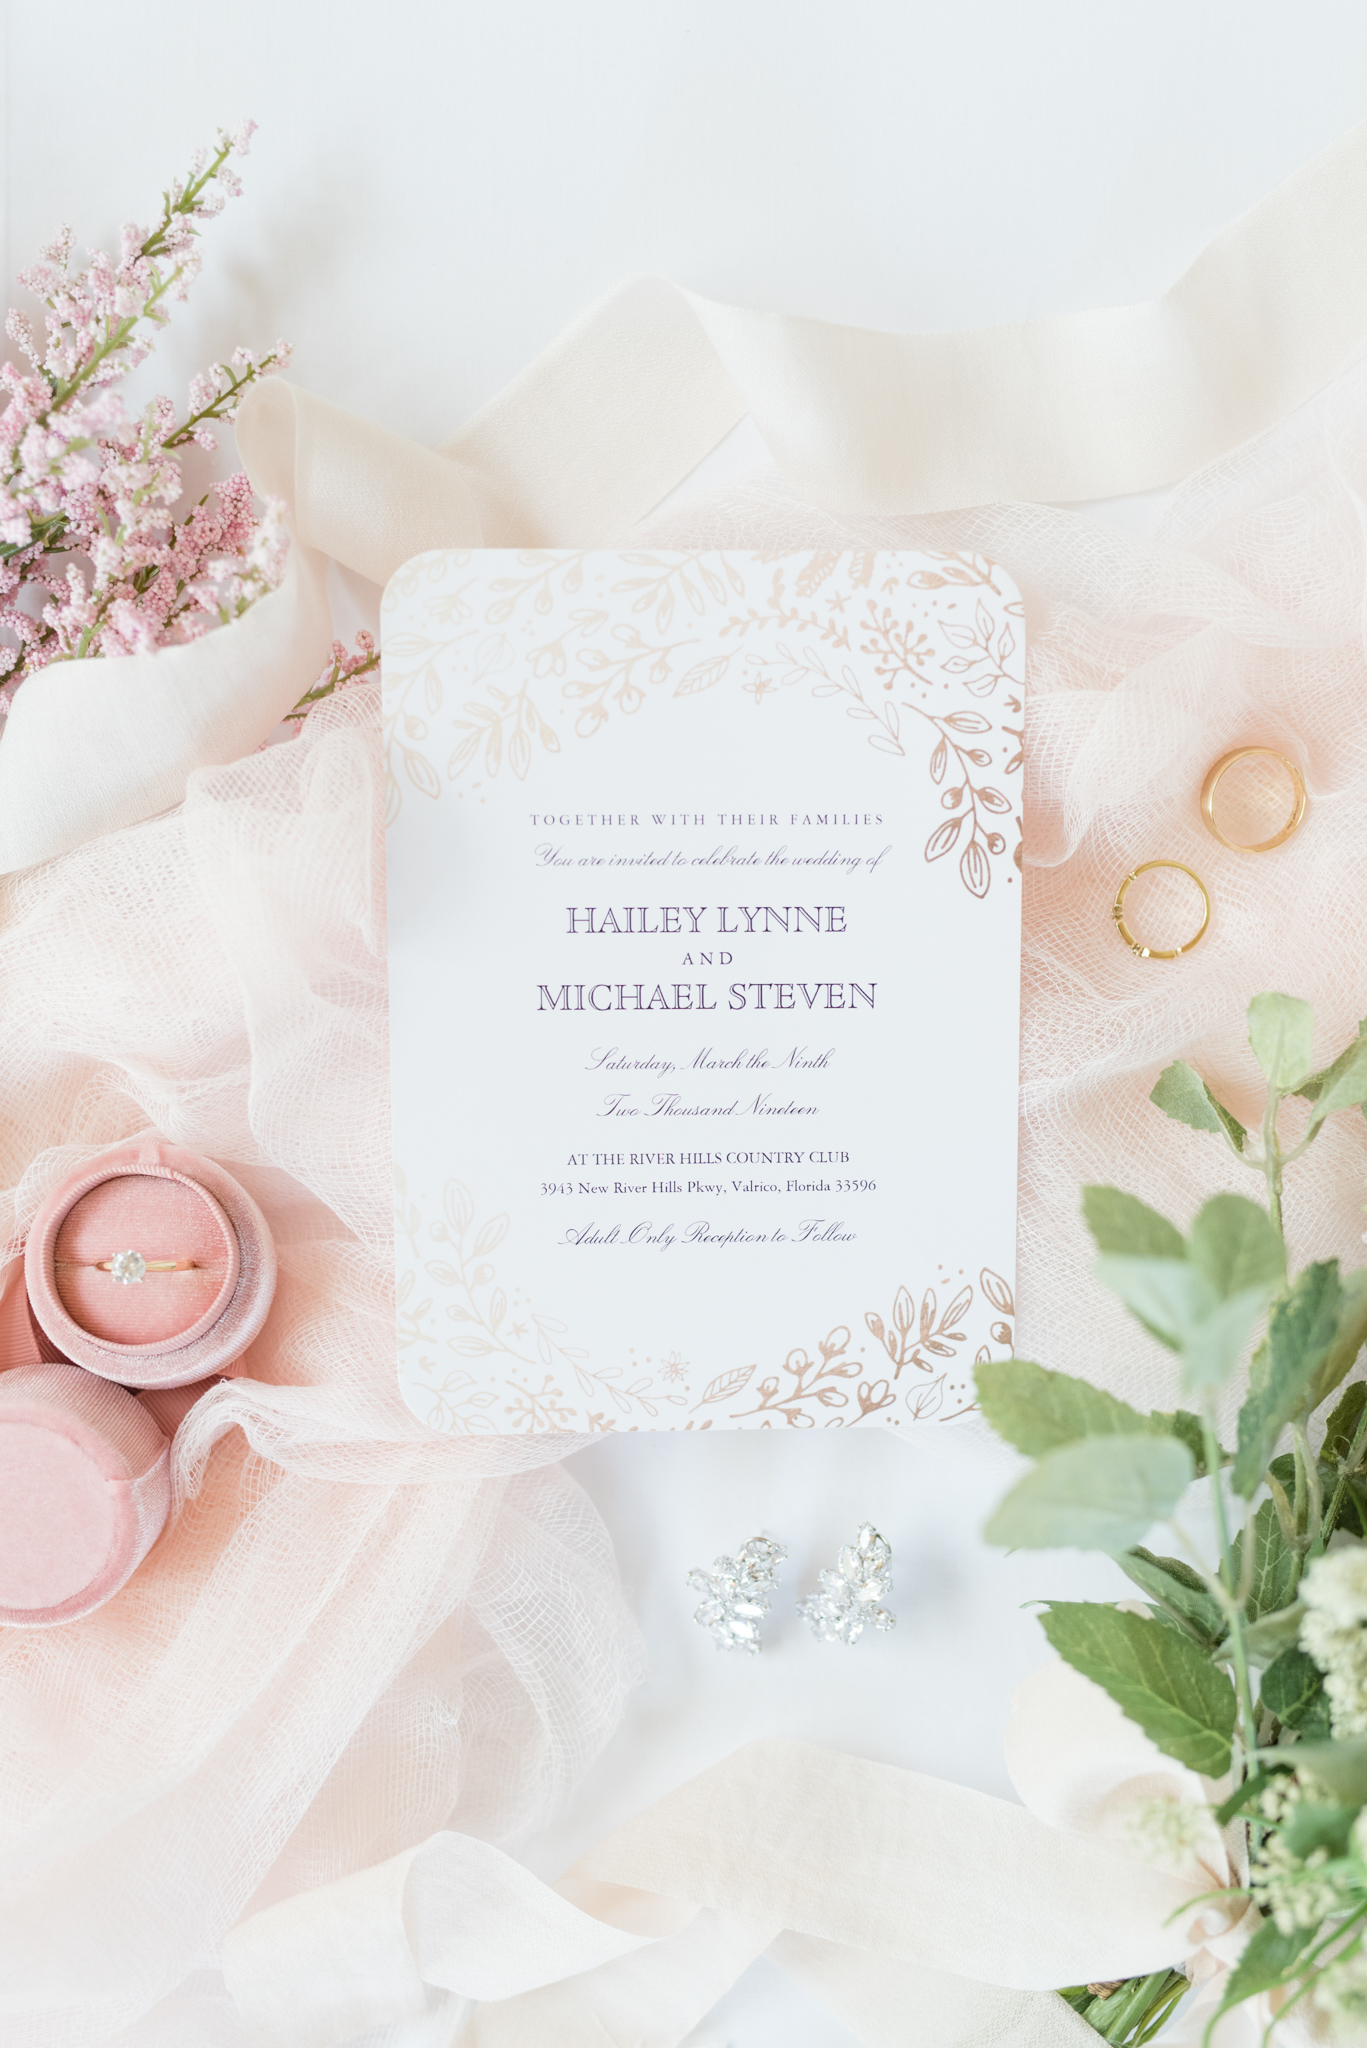 Wedding invitation and rings